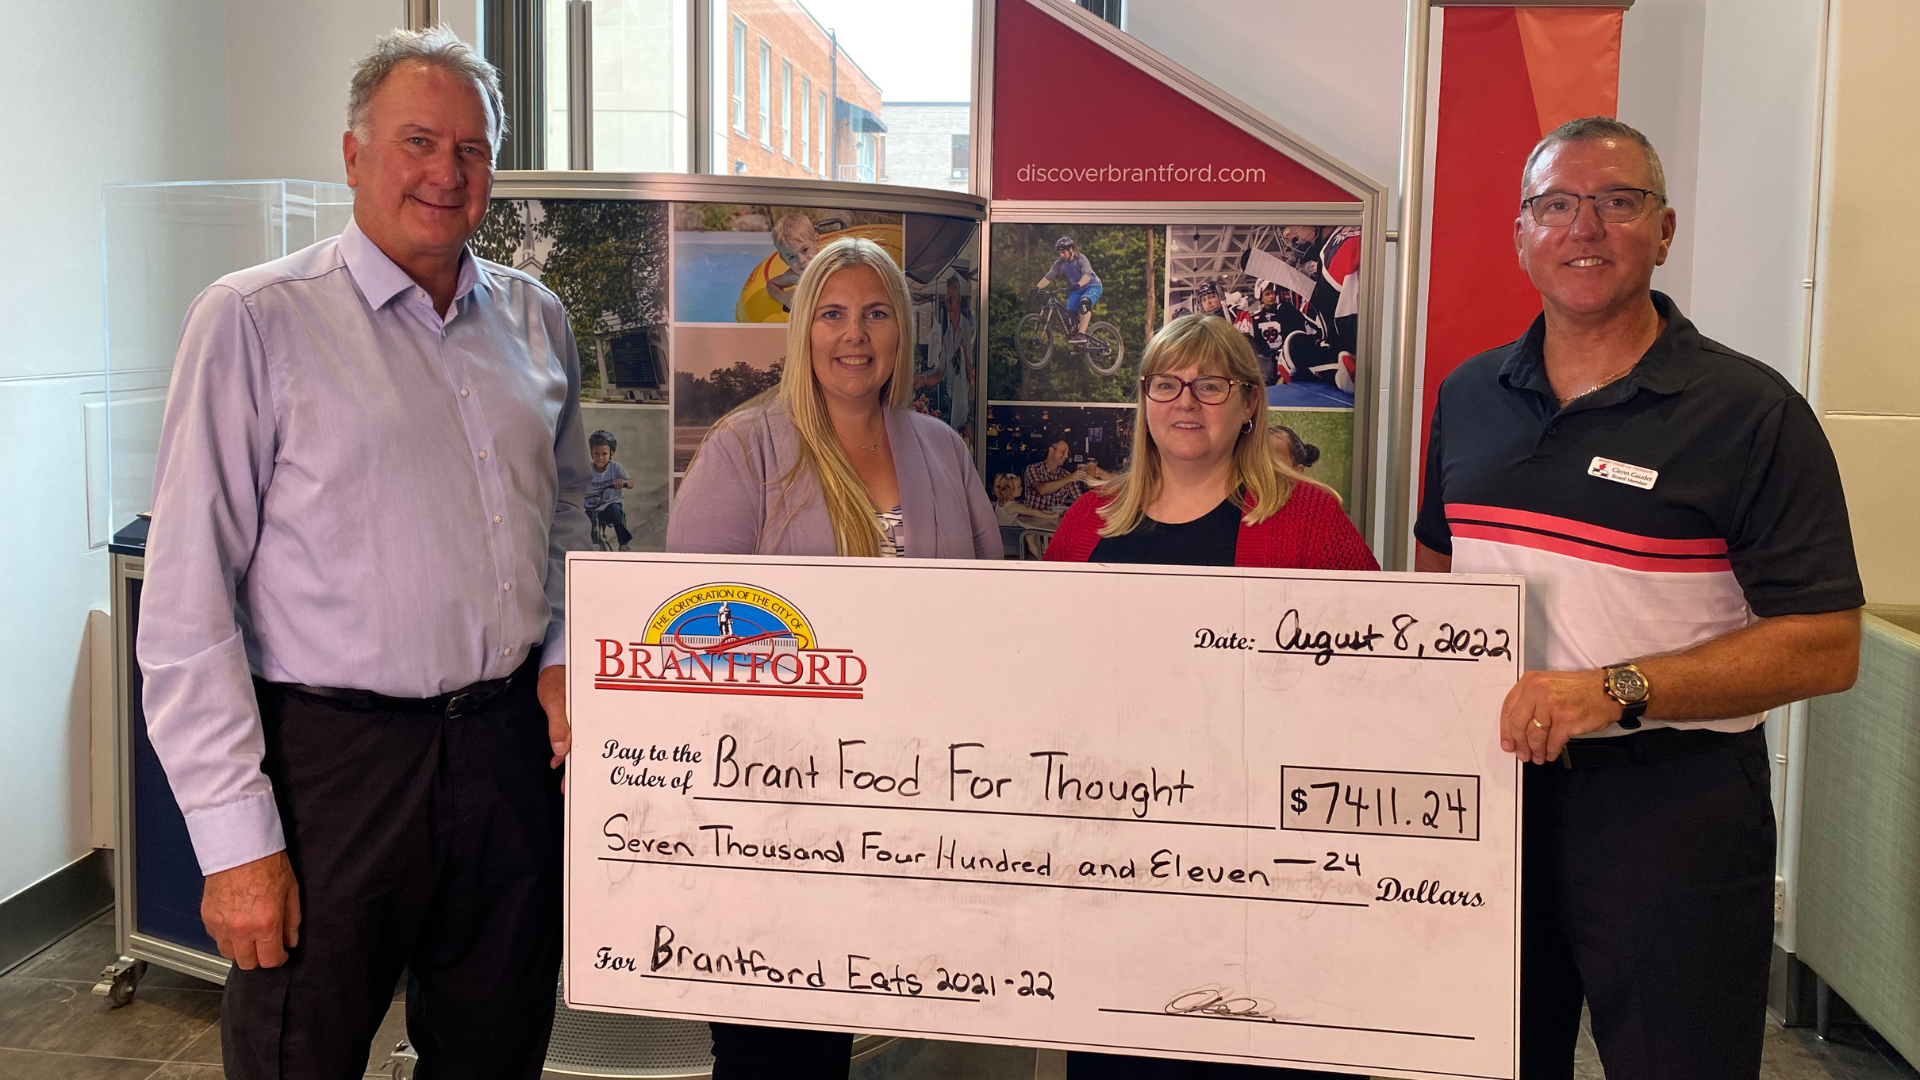 Mayor Kevin Davis presents a cheque for $7,411.24 to Brant Food for Thought for the total proceeds raised from Brantford Eats Local booklet sales.